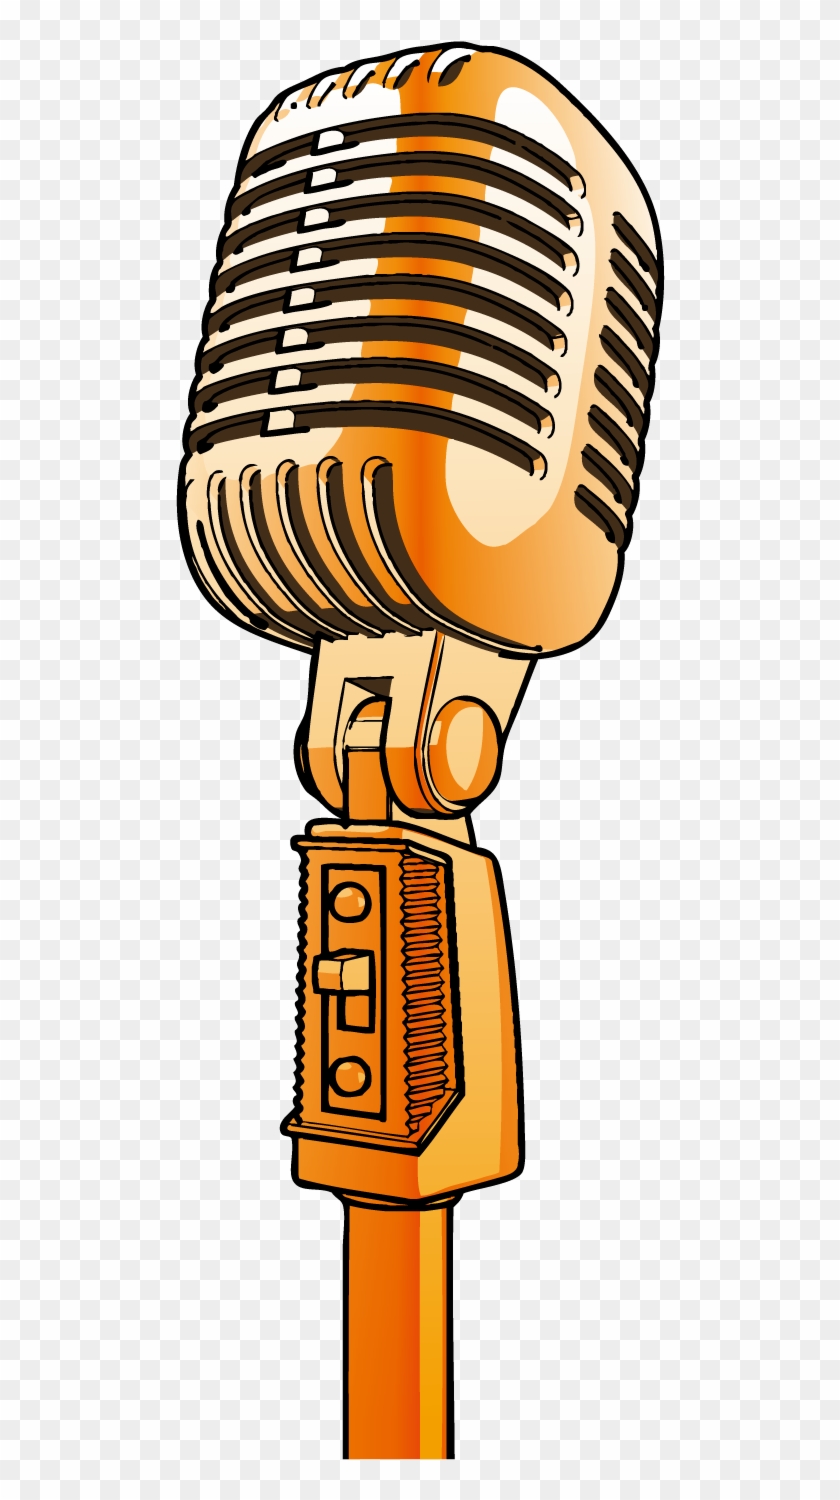 Gold Drawing Microphone - Mic Cartoon Png #1655901